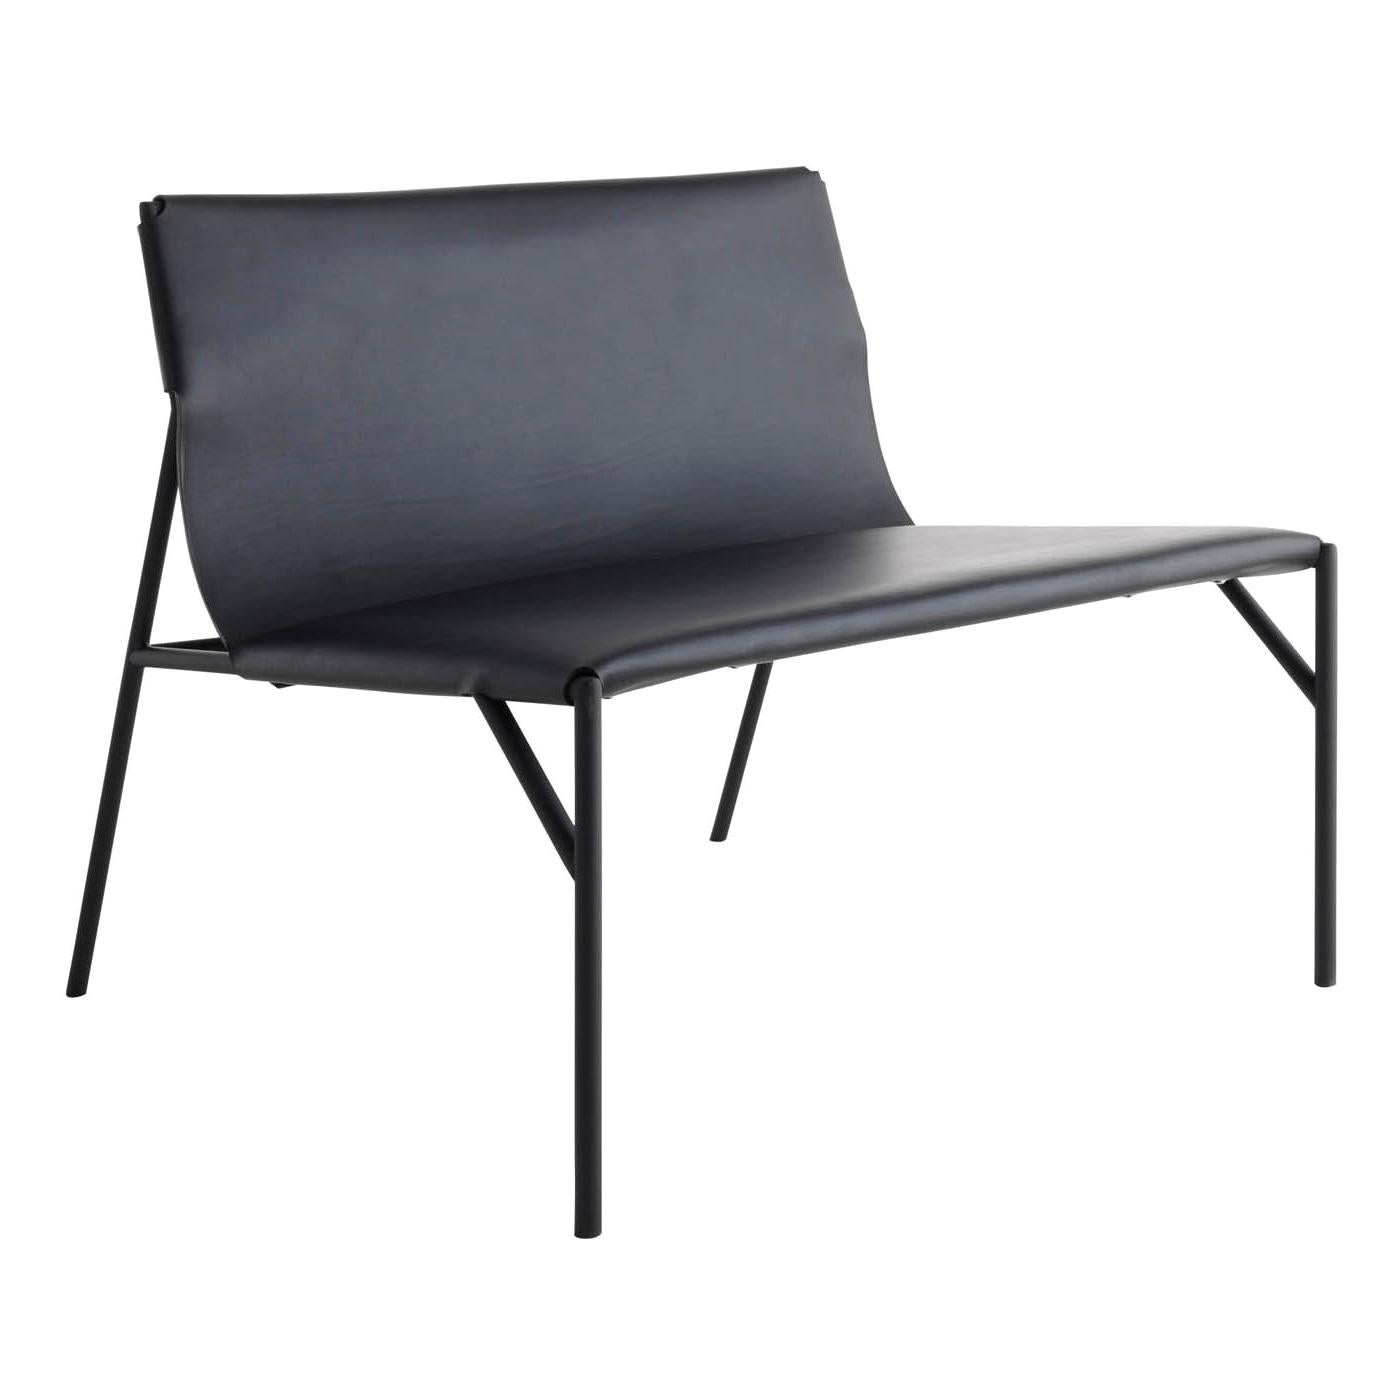 Horm Lounge Chairs